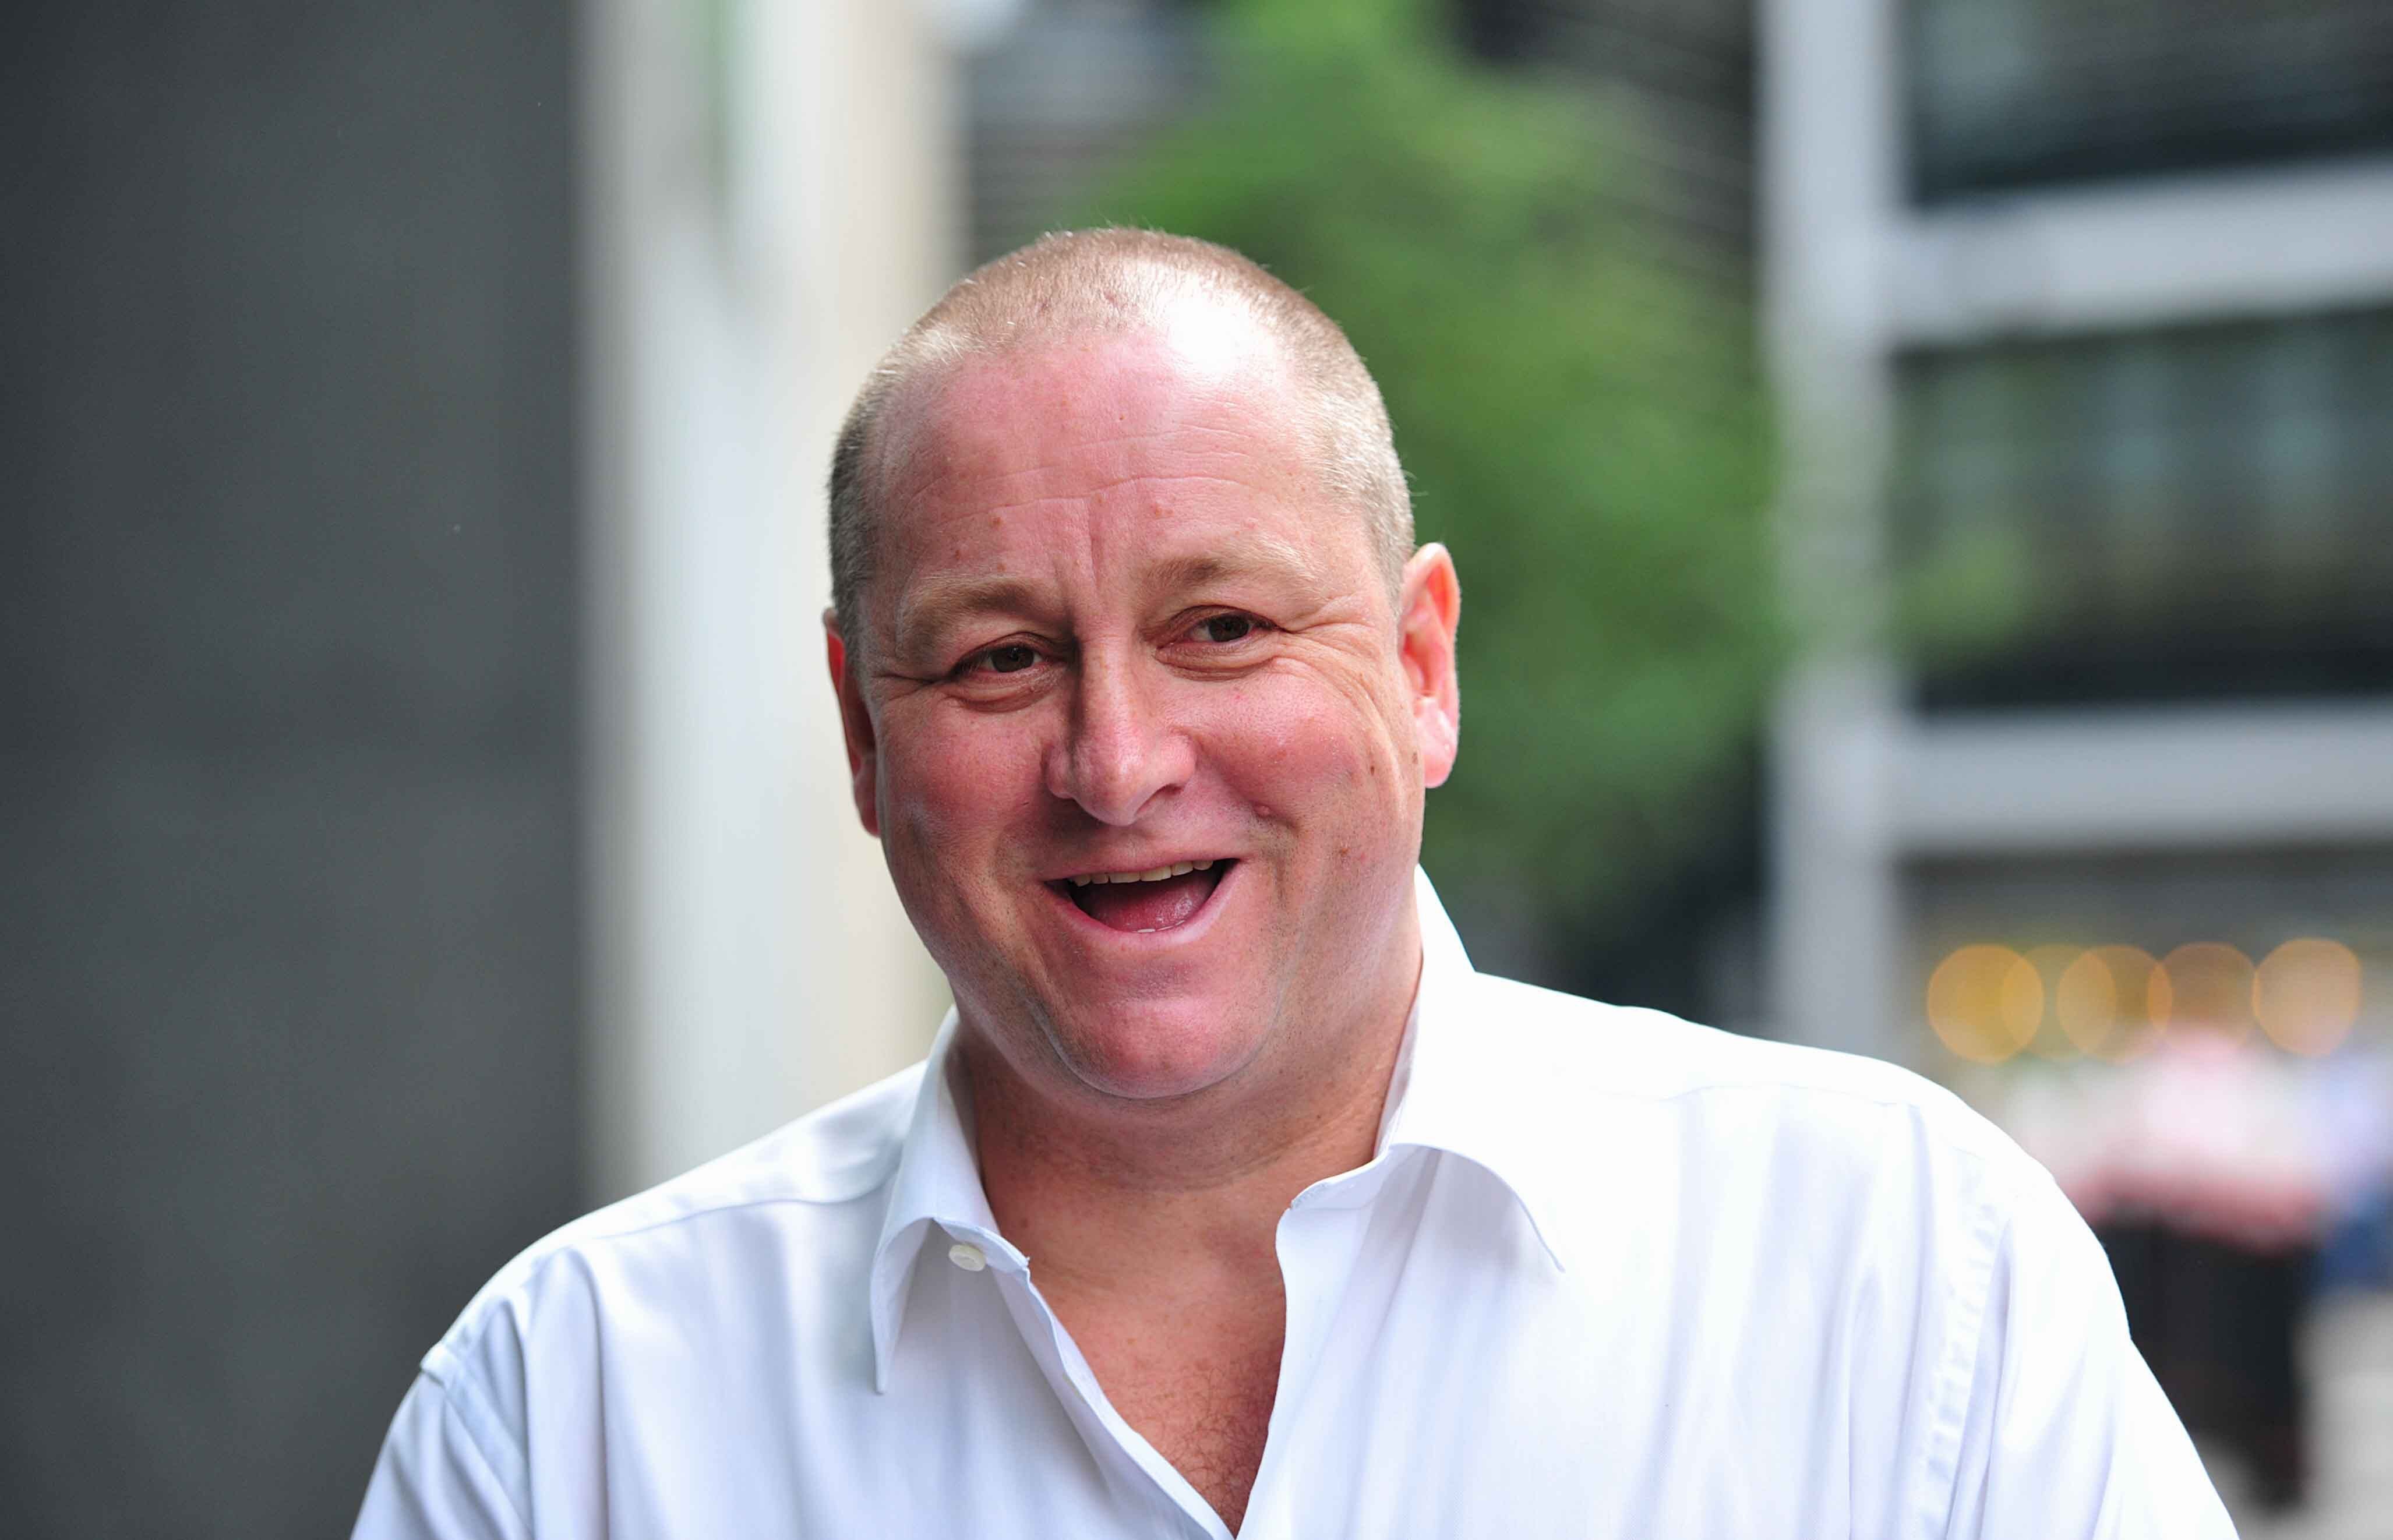 Quixotic billionaire Mike Ashley, founder of Sports Direct and current boss of Frasers Group